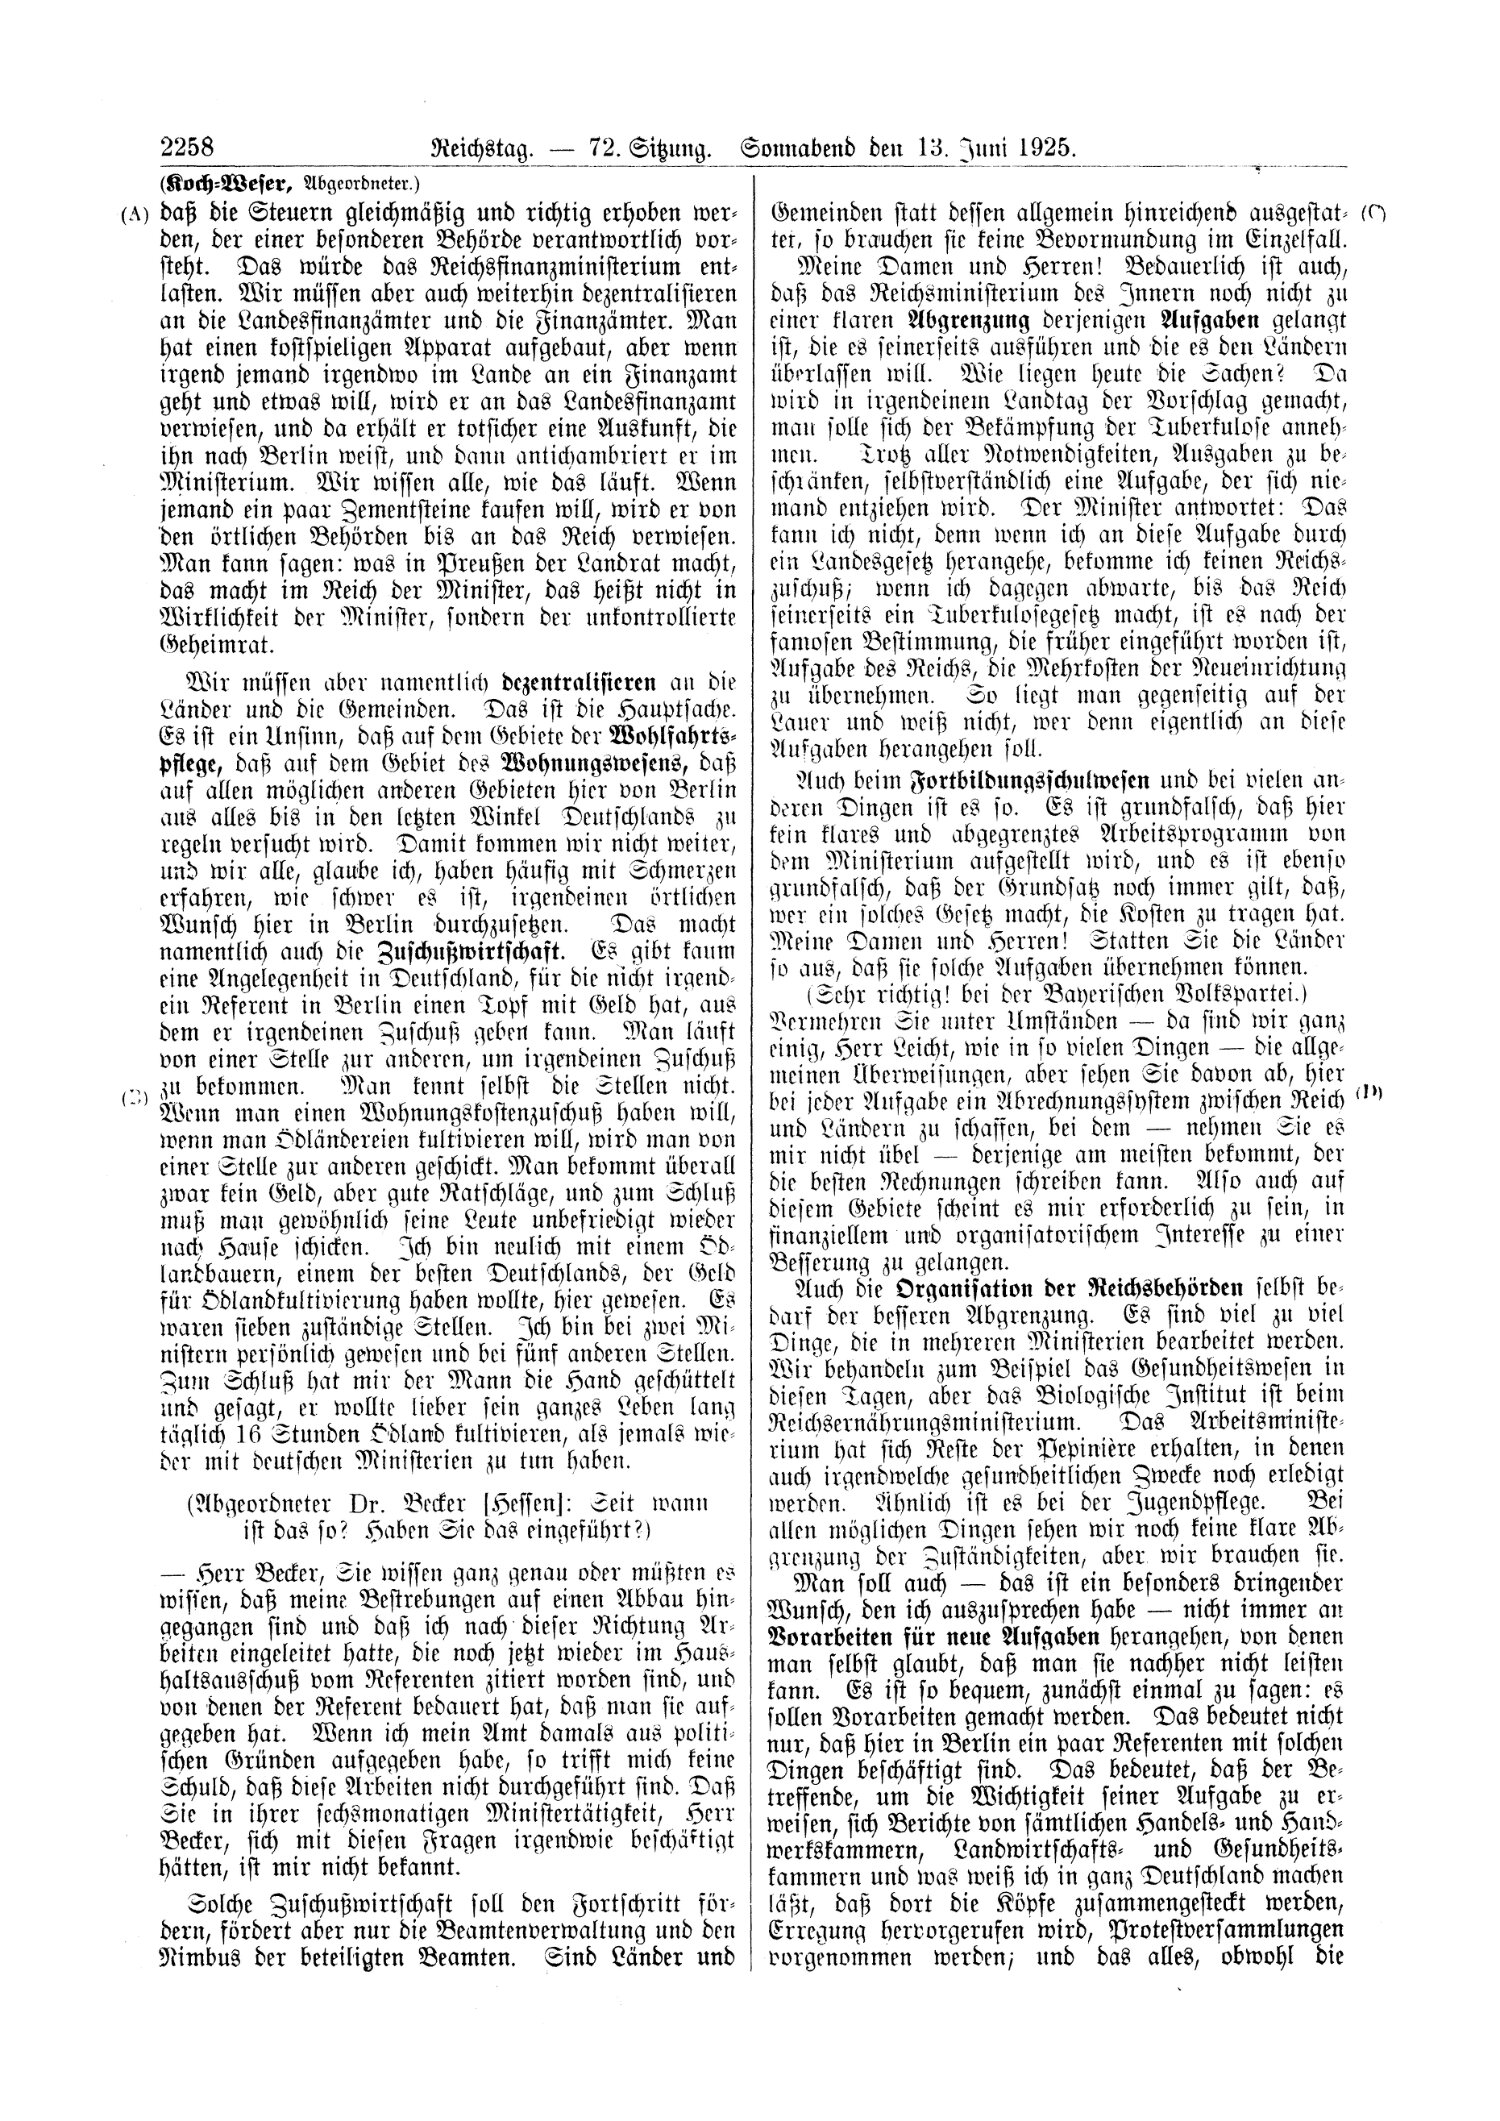 Scan of page 2258